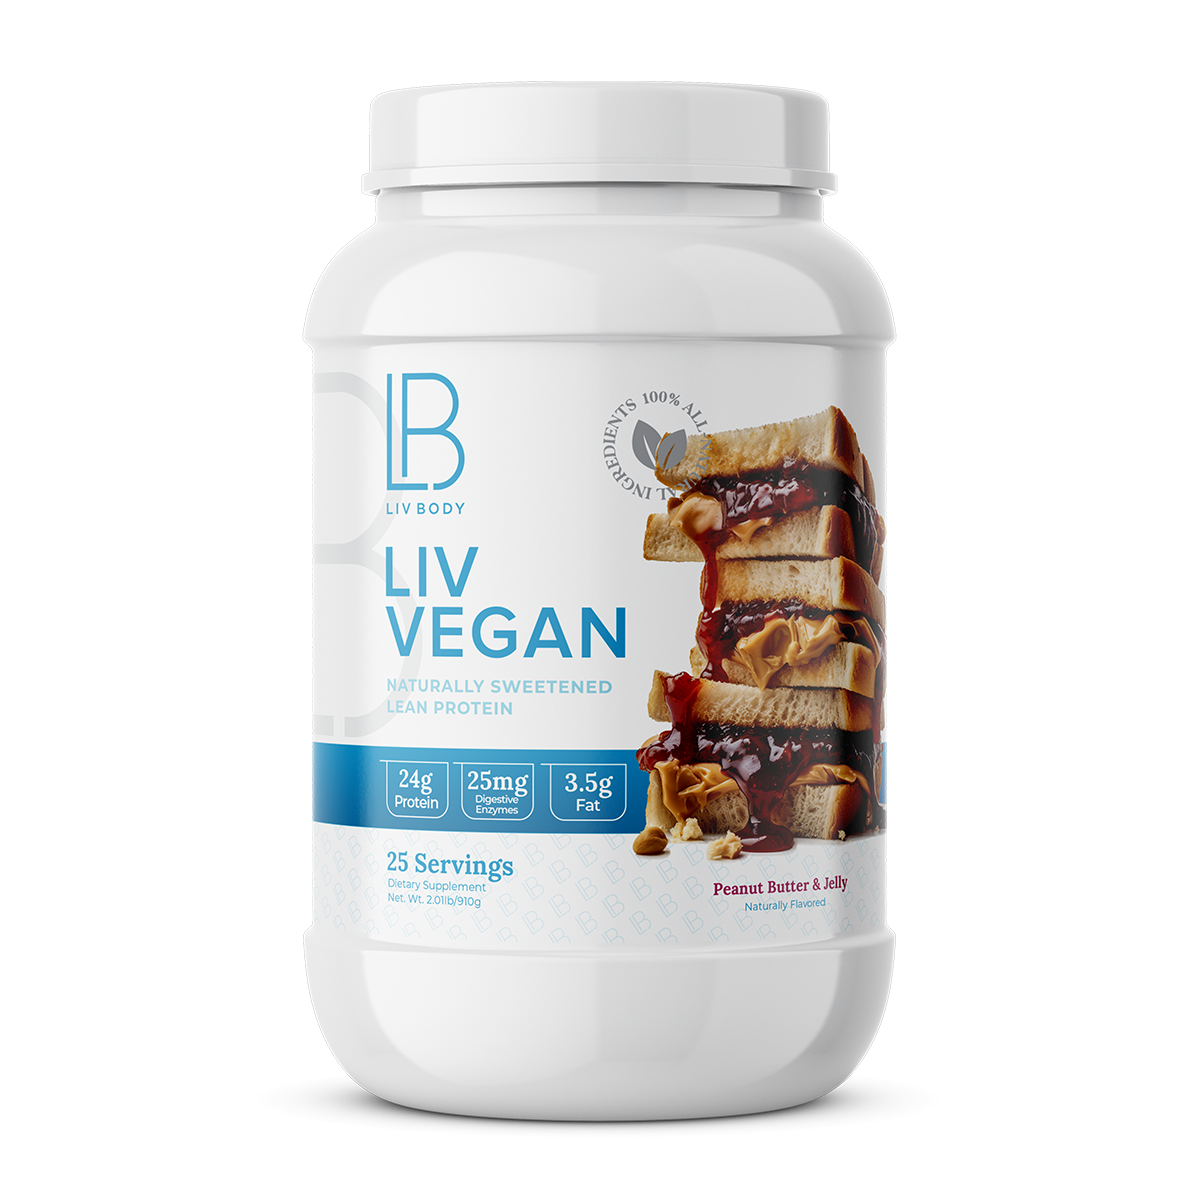 Image of LIV Vegan - Lean Protein, perfect for muscle gain on a vegan diet.